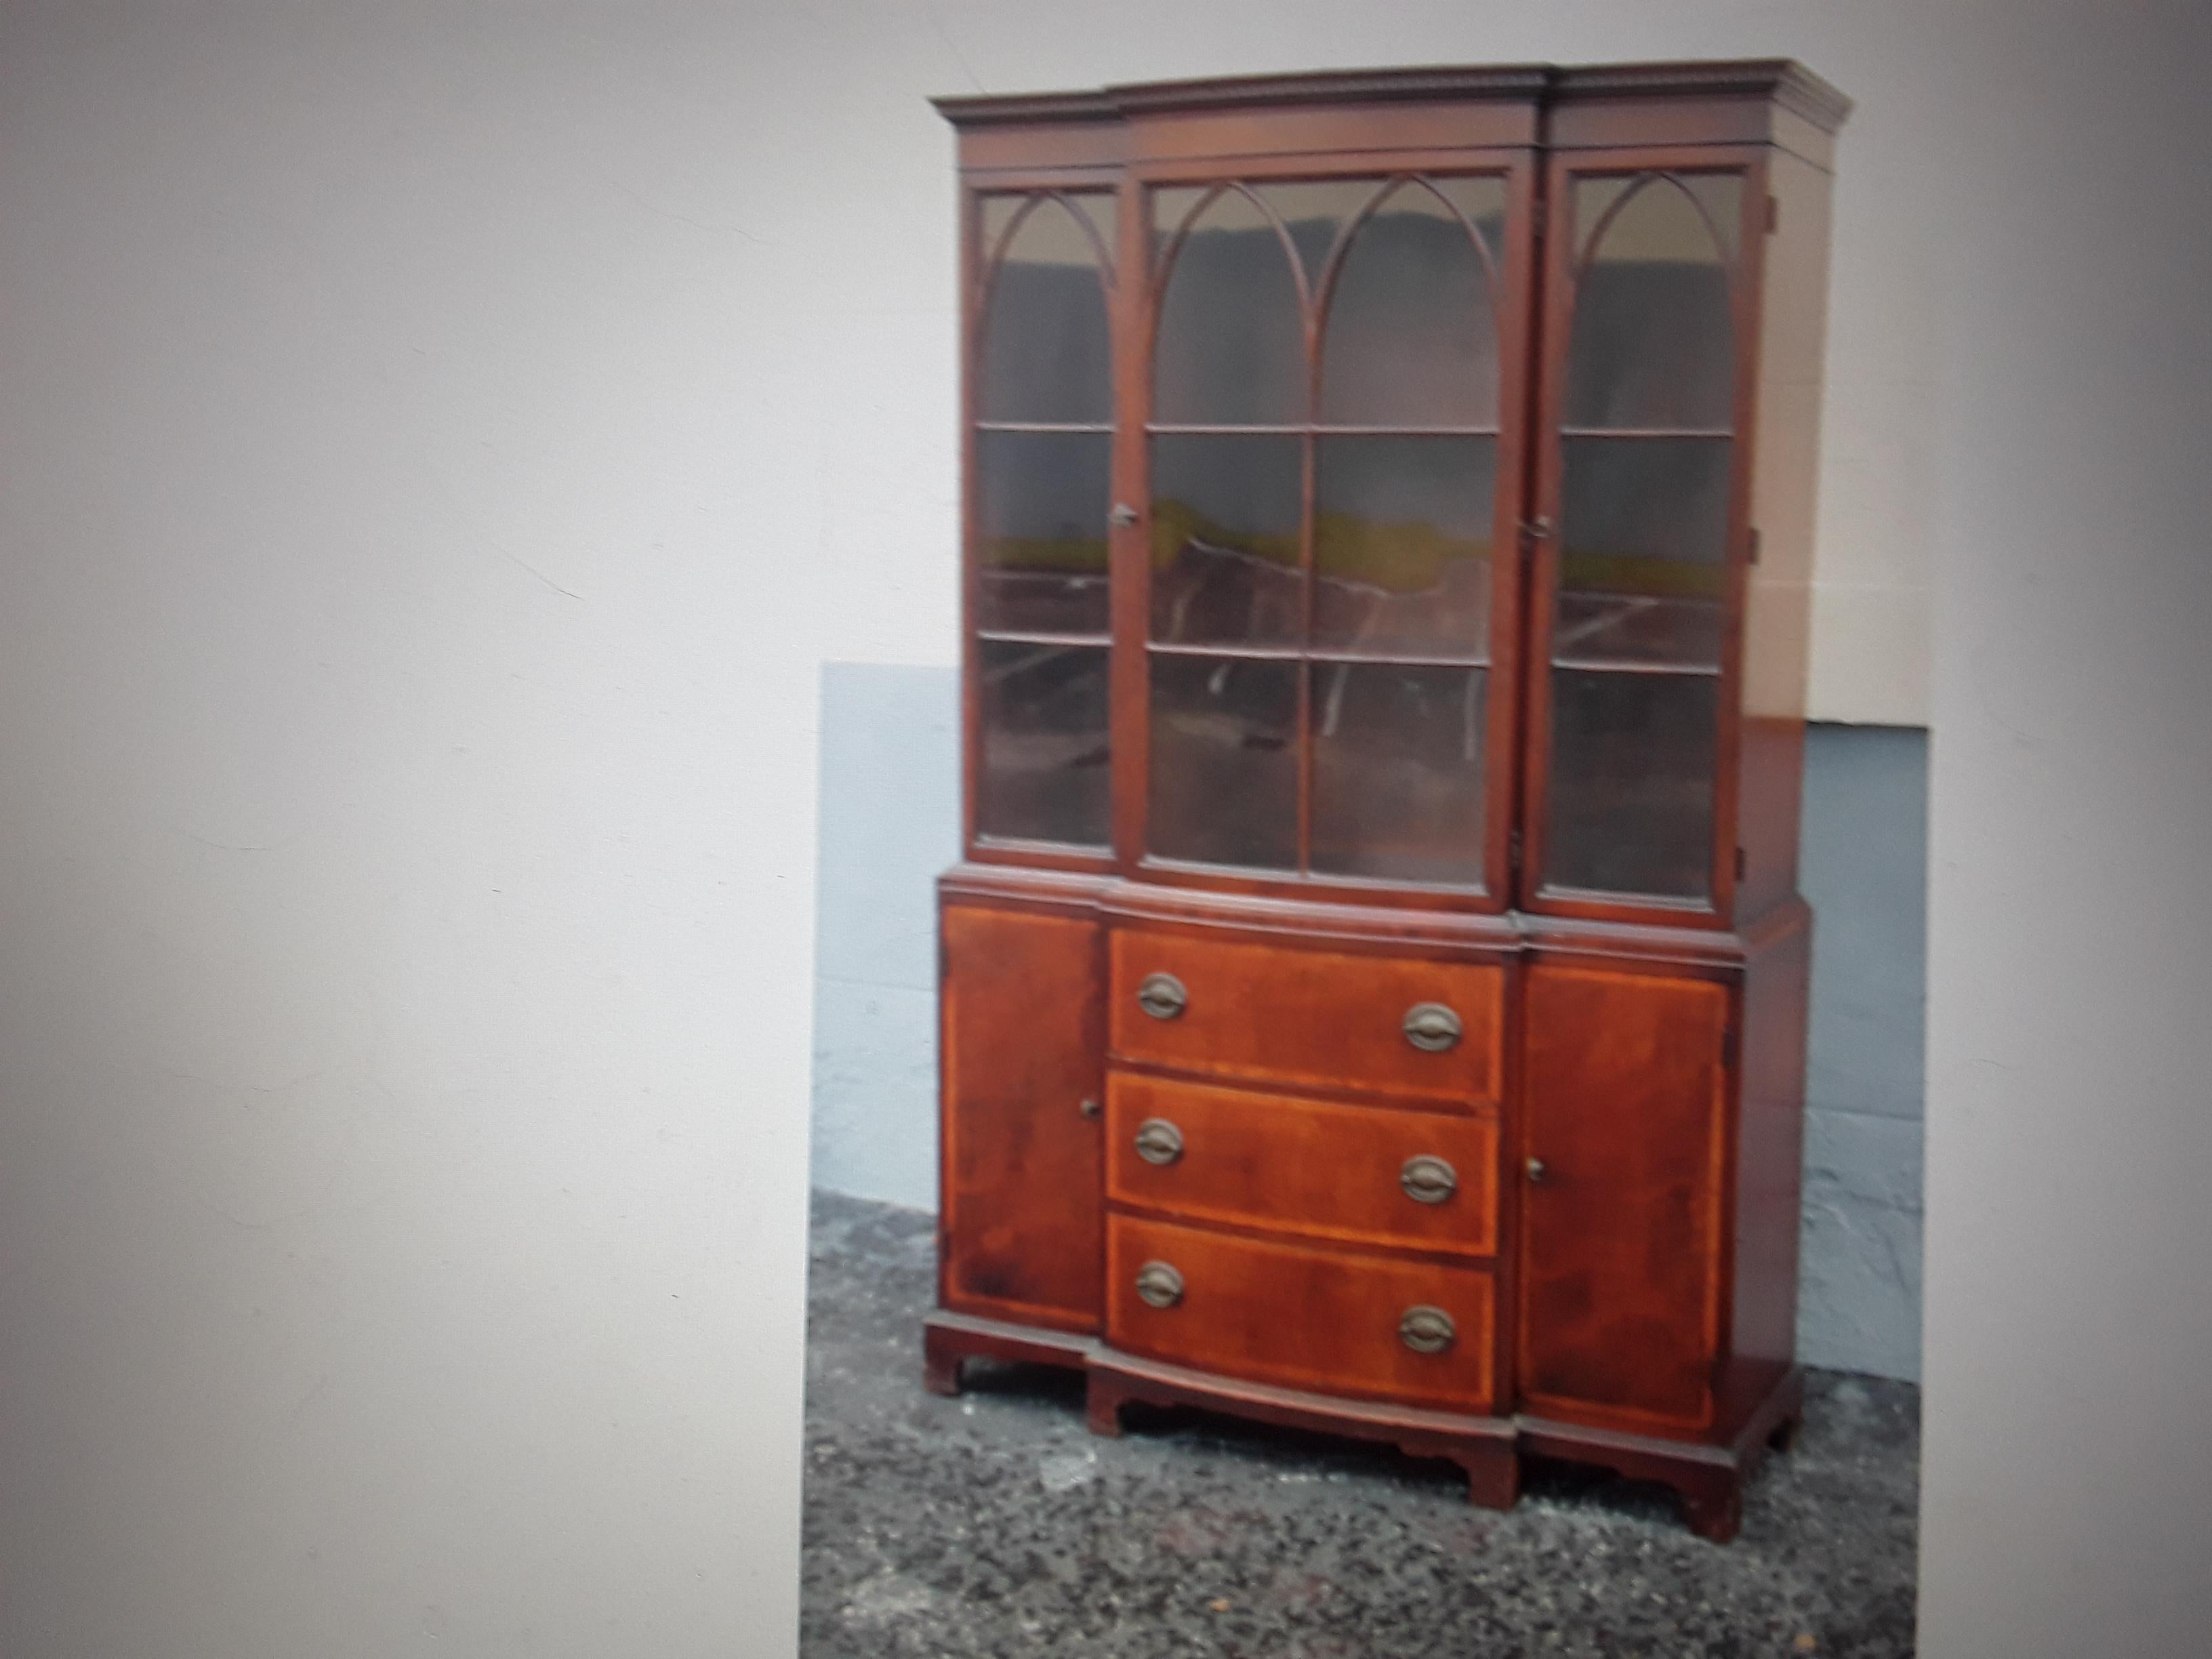 1940's Traditional style Tall Mahogany China/ Display Cabinet. The woodwork is beautiful. There is a lot of storage. Glass plane front!. Please look closely at pictures as they tell the story.